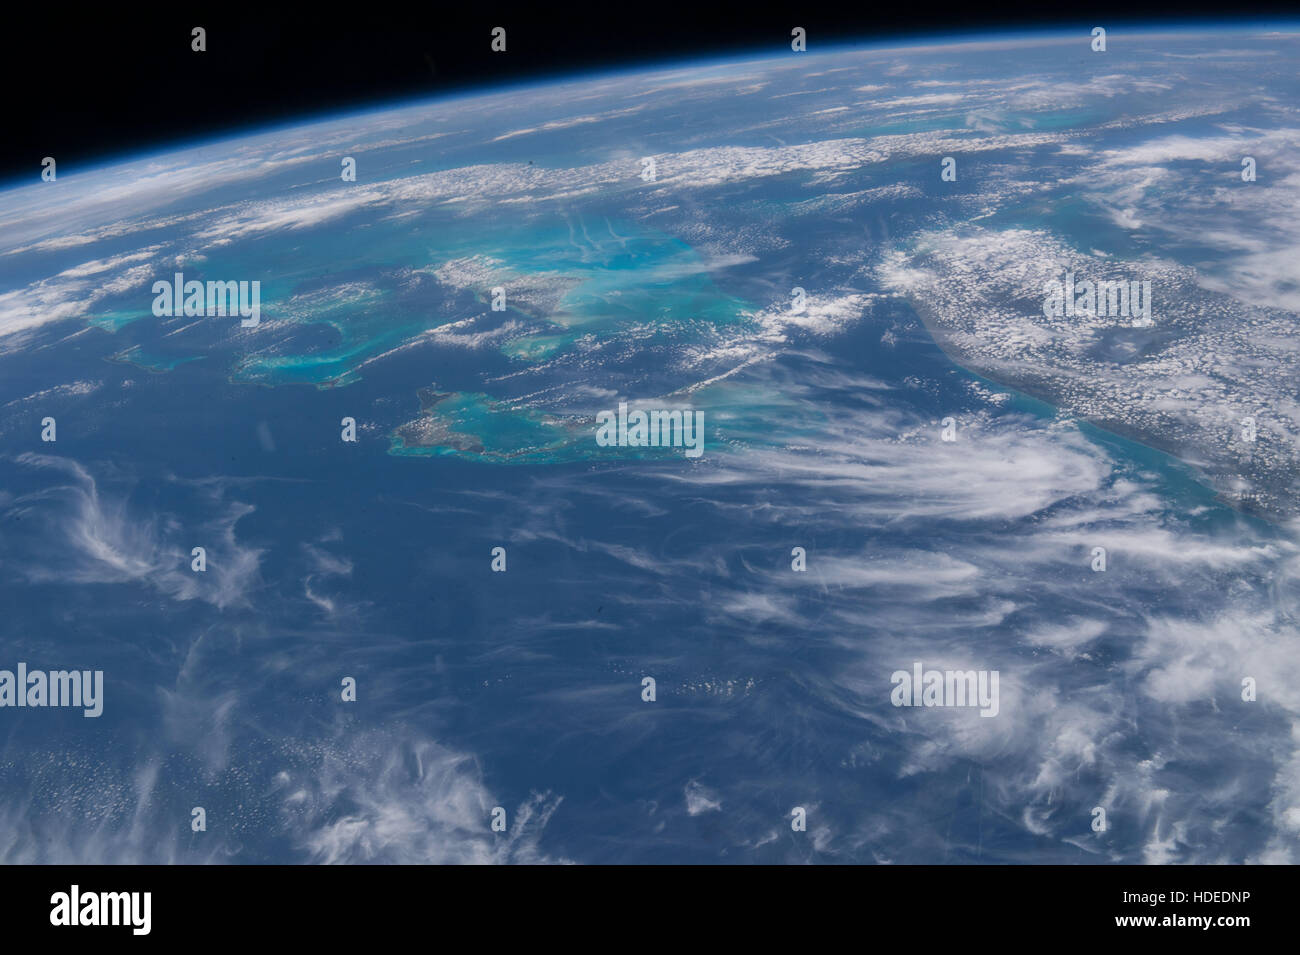 A satellite Earth observation image taken by the NASA International Space Station Expedition 47 crew shows the Florida peninsula, Bahama island chain, and Cuba April 20, 2016 in Earth orbit. Stock Photo